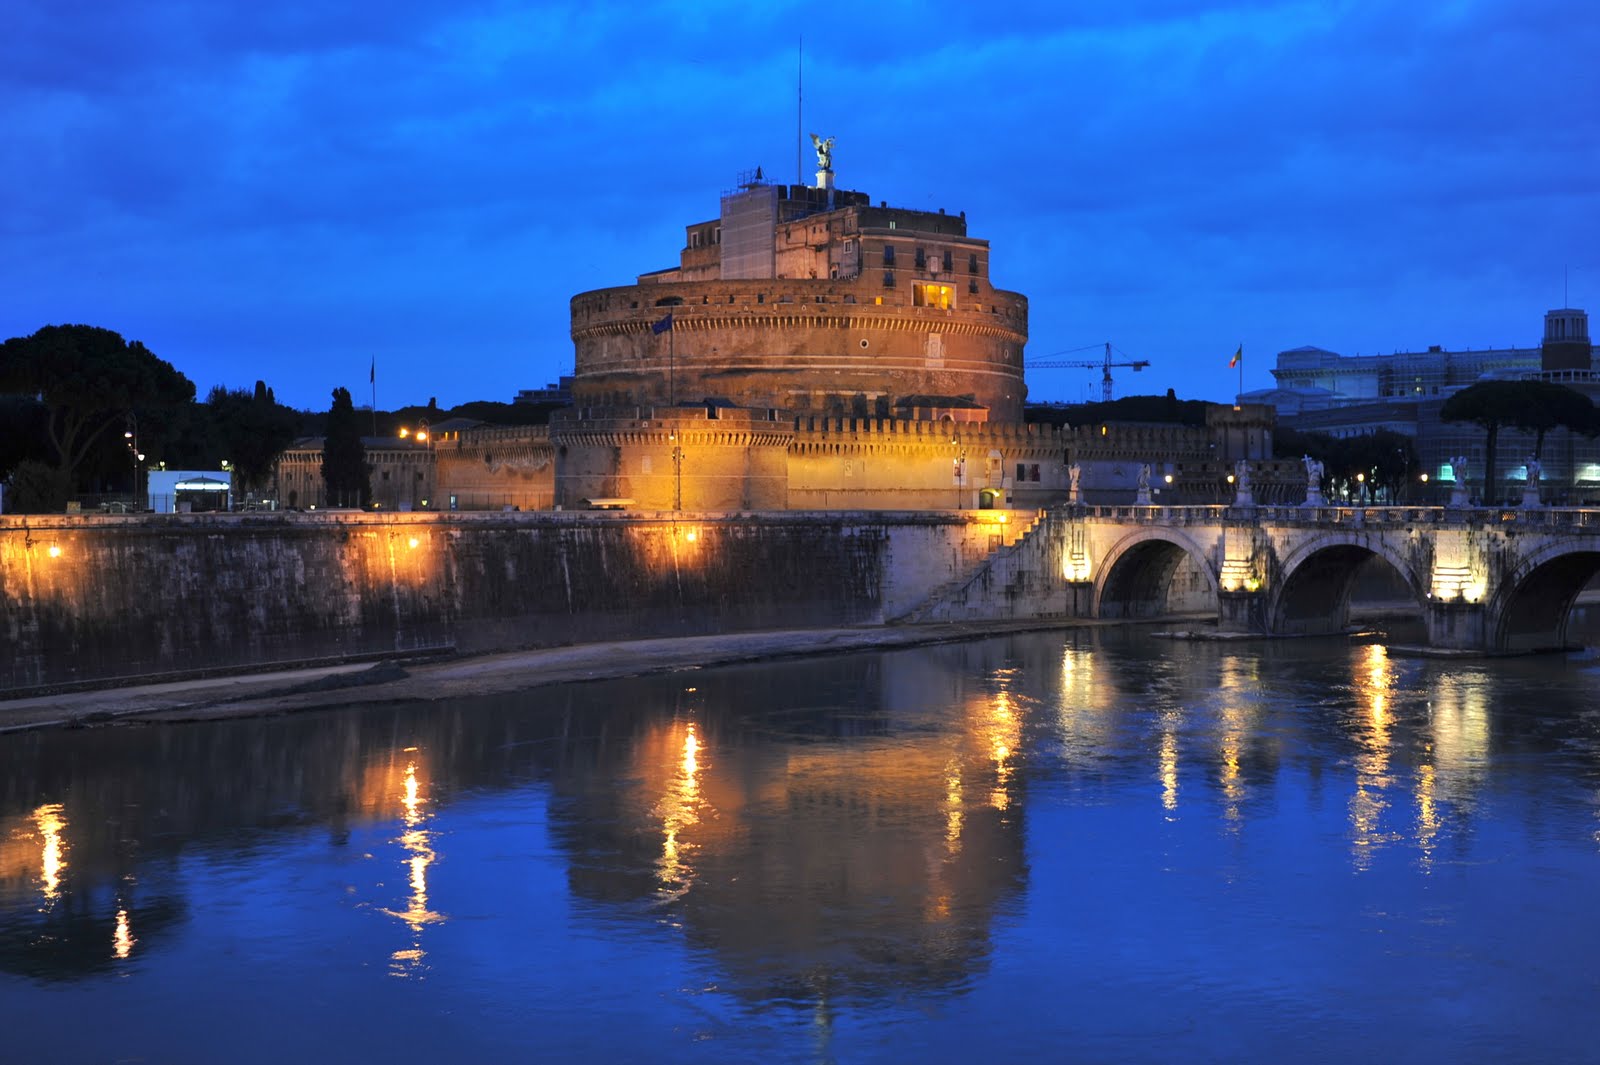 Merlin and Rebecca: Castle Hunting: Castel Sant'Angelo